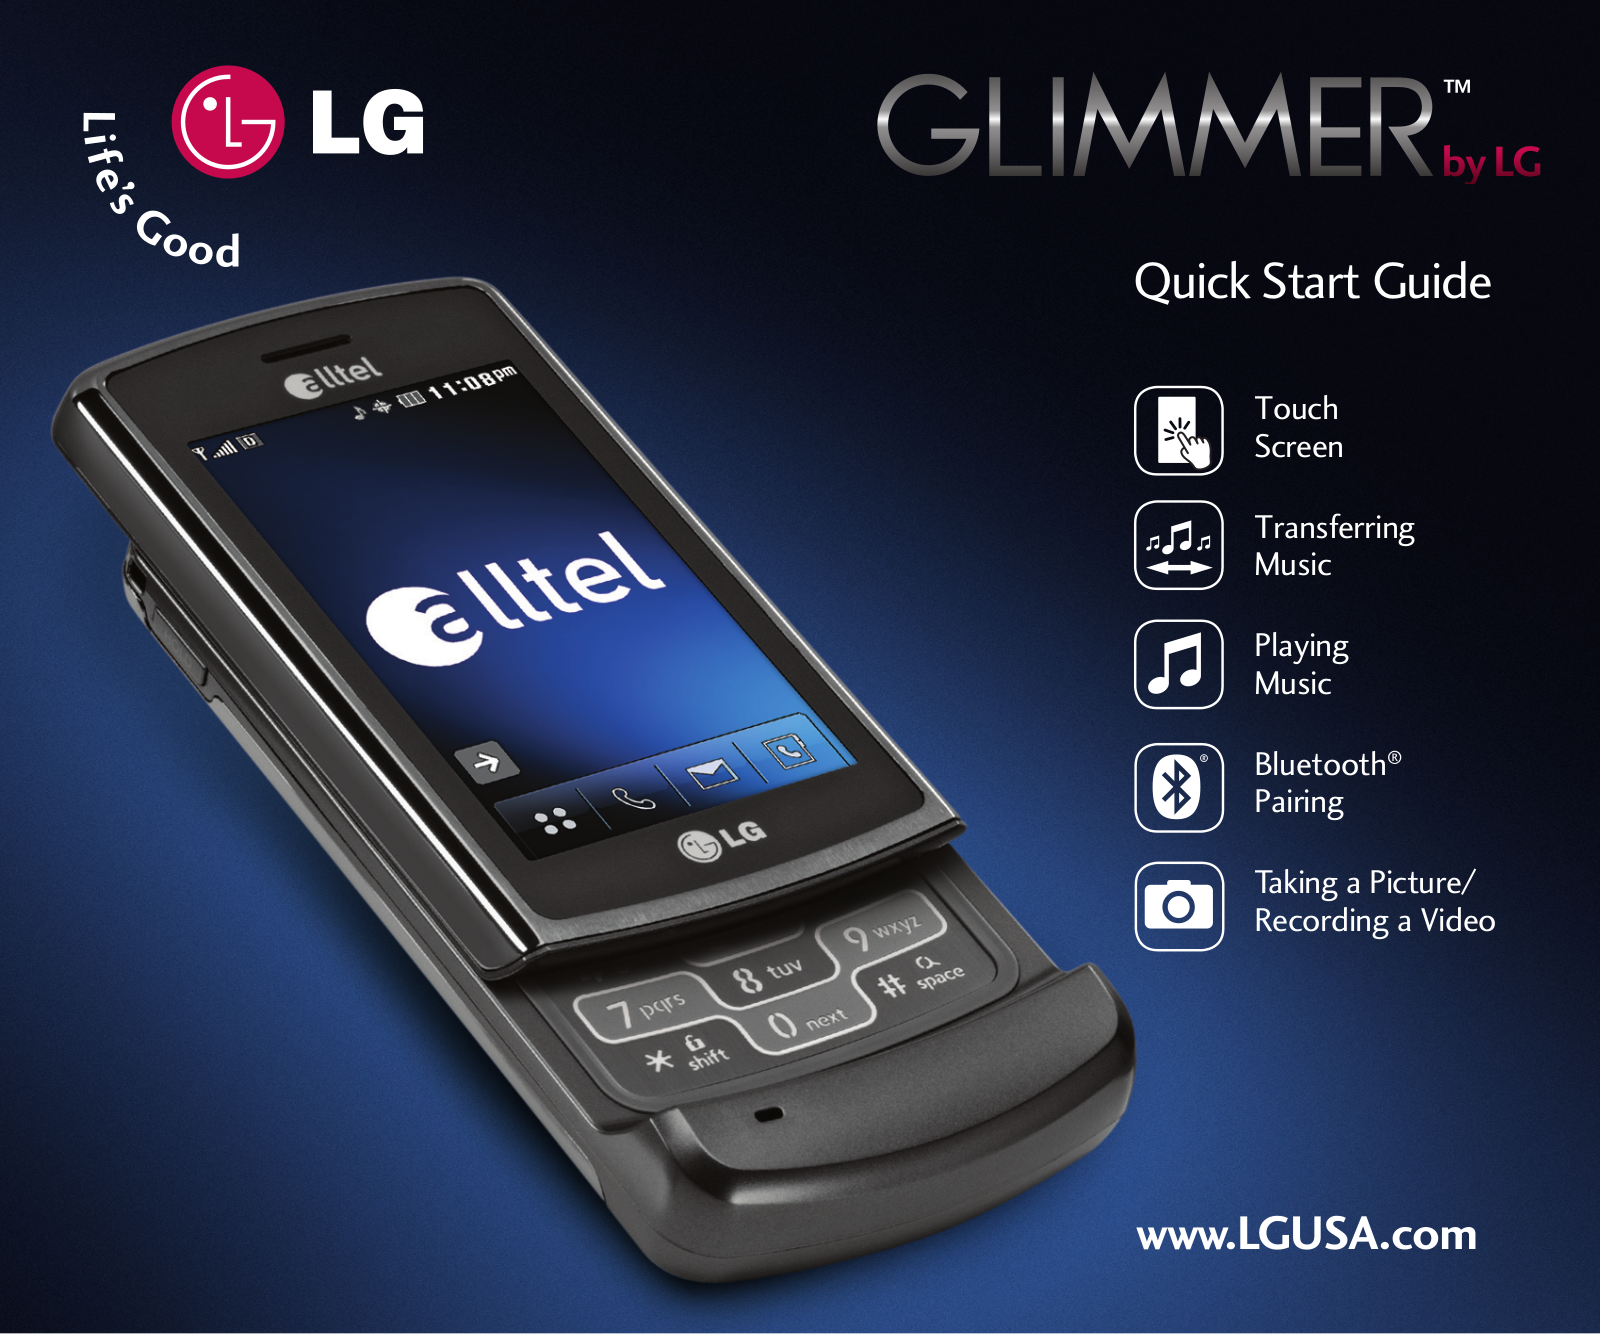 LG Glimmer, AX830 Quick Start Guide